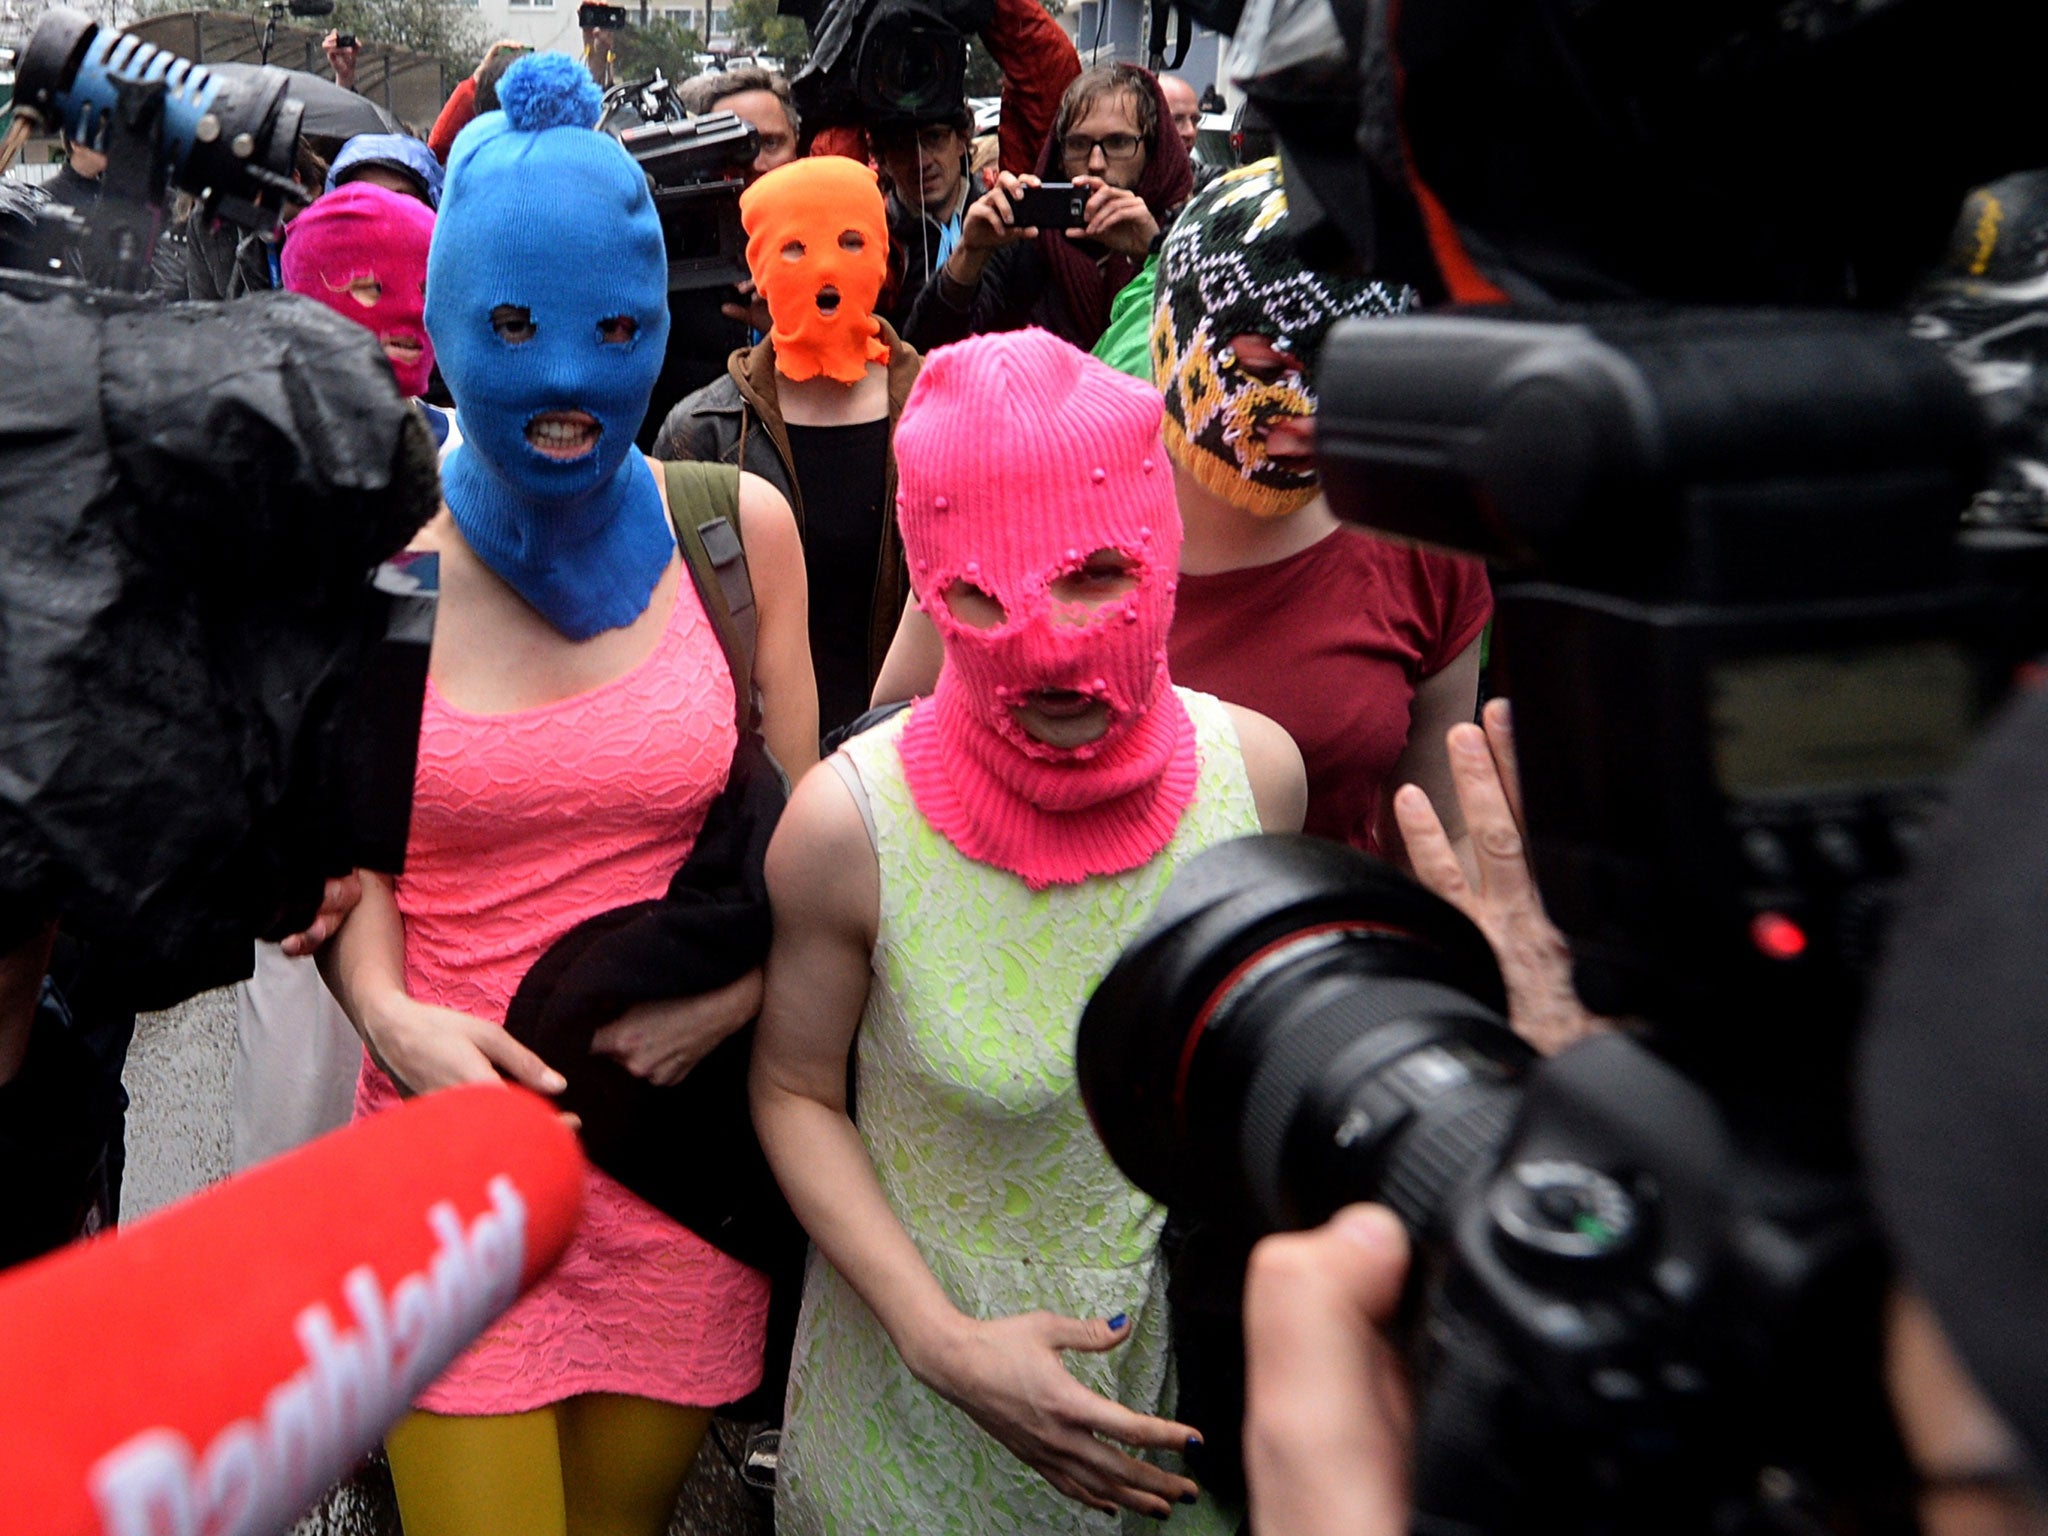 Two Members Of Pussy Riot Detained In Sochi Are Released The Independent The Independent